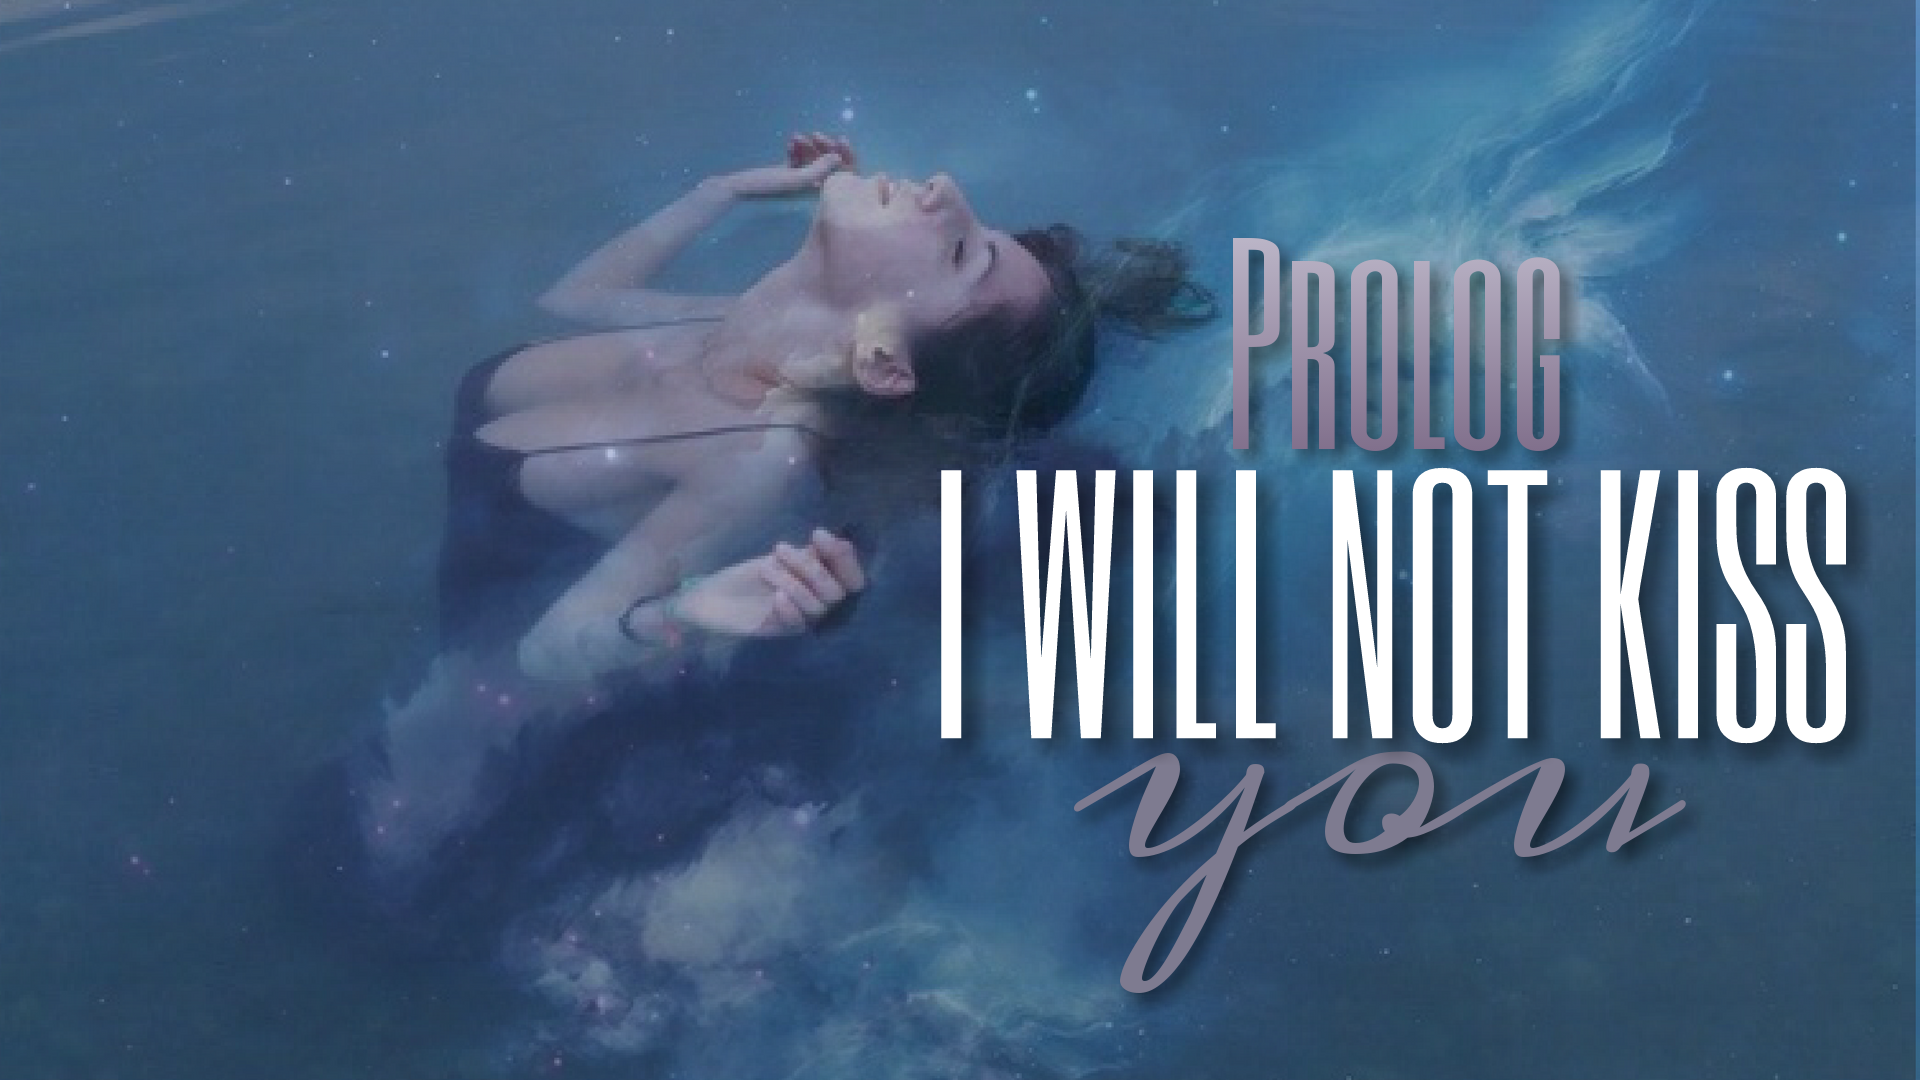 I will not kiss you — prolog